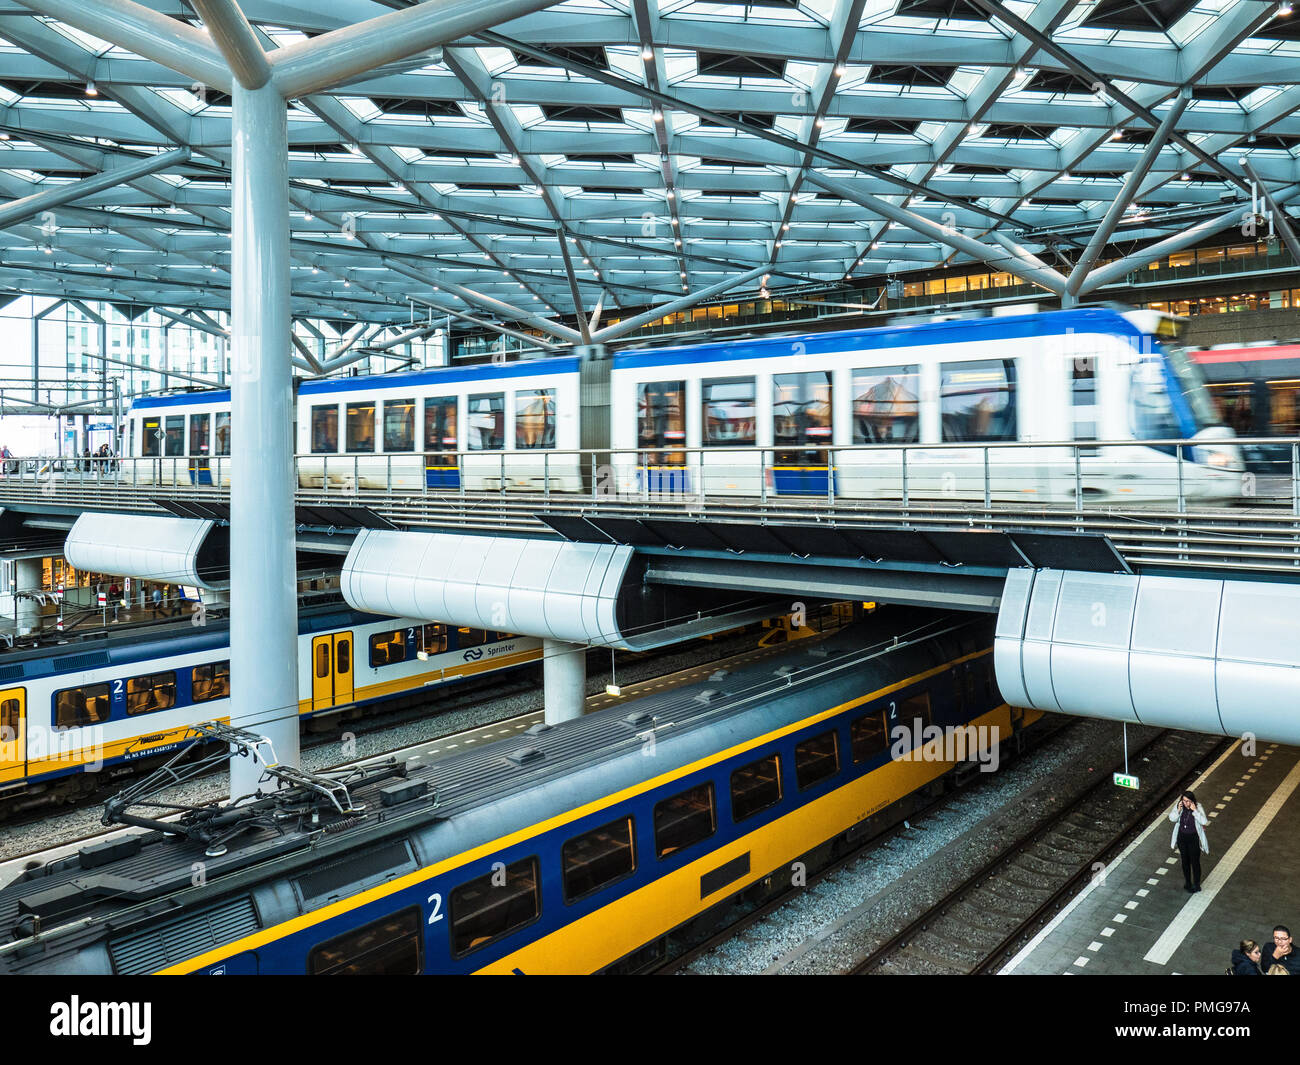 The Hague Railway Station - multi level transport at Den Haag railway station, trams above, trains below Stock Photo